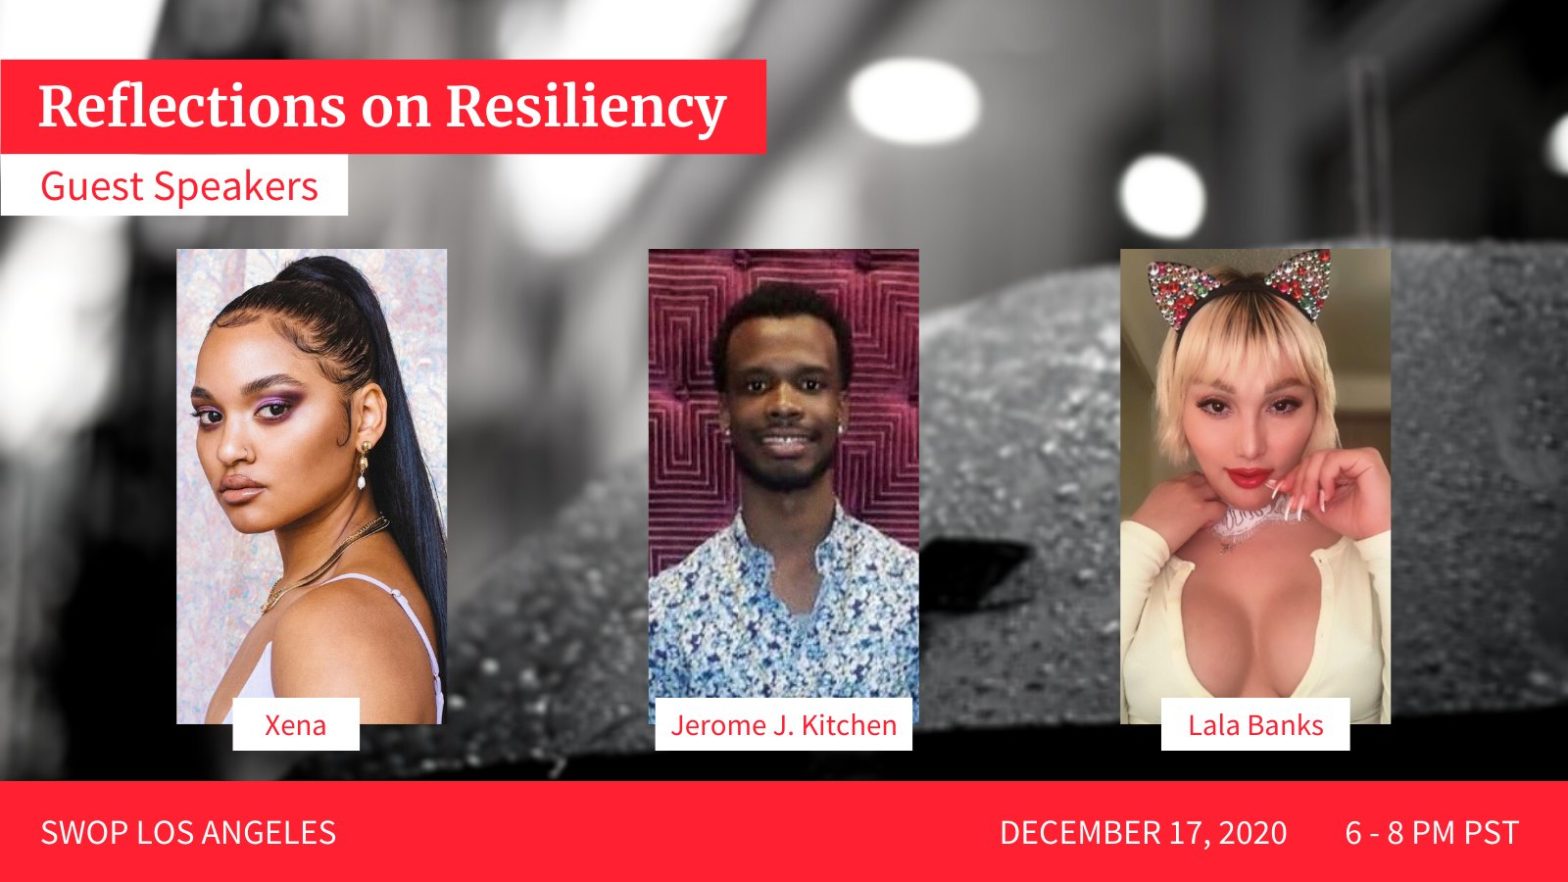 graphic with a black and white image of an umbrella as the background top left reads: Reflections on Resliency Guest Speakers three headshots in a row, labeled left to right: Xena, Jerome J. Kitchen, Lala Banks red banner across the bottom reads: DECEMBER 17, 2020  6-8 PM PST